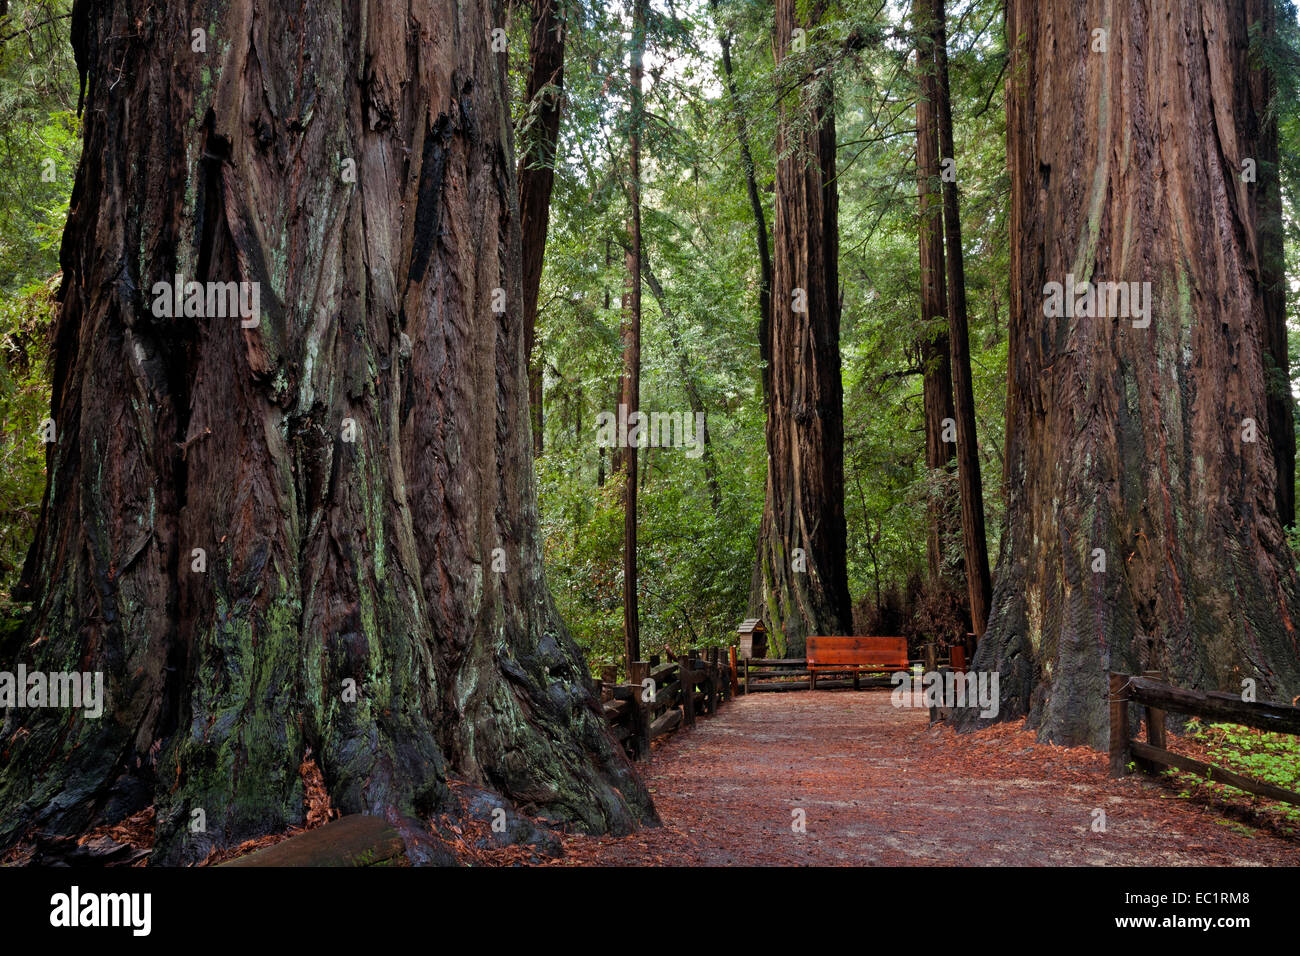 CA02452-00...CALIFORNIA - Redwood alberi lungo il Redwood Grove Loop Trail in Henry Cowell Redwoods State Park. Foto Stock